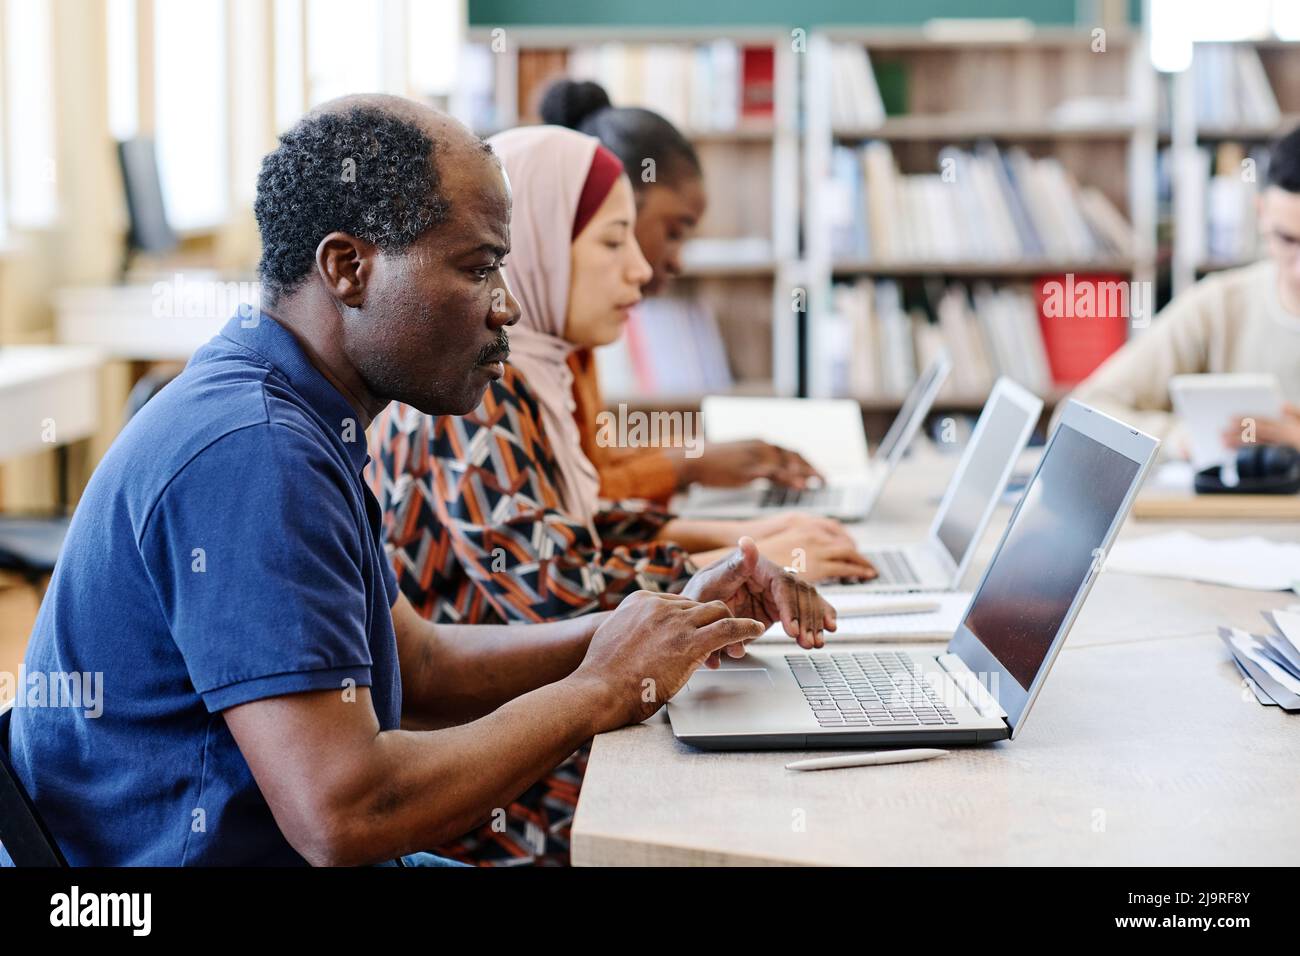 Group of ethnically diverse immigrant students wokring on laptops during lesson searching for information in Internet Stock Photo